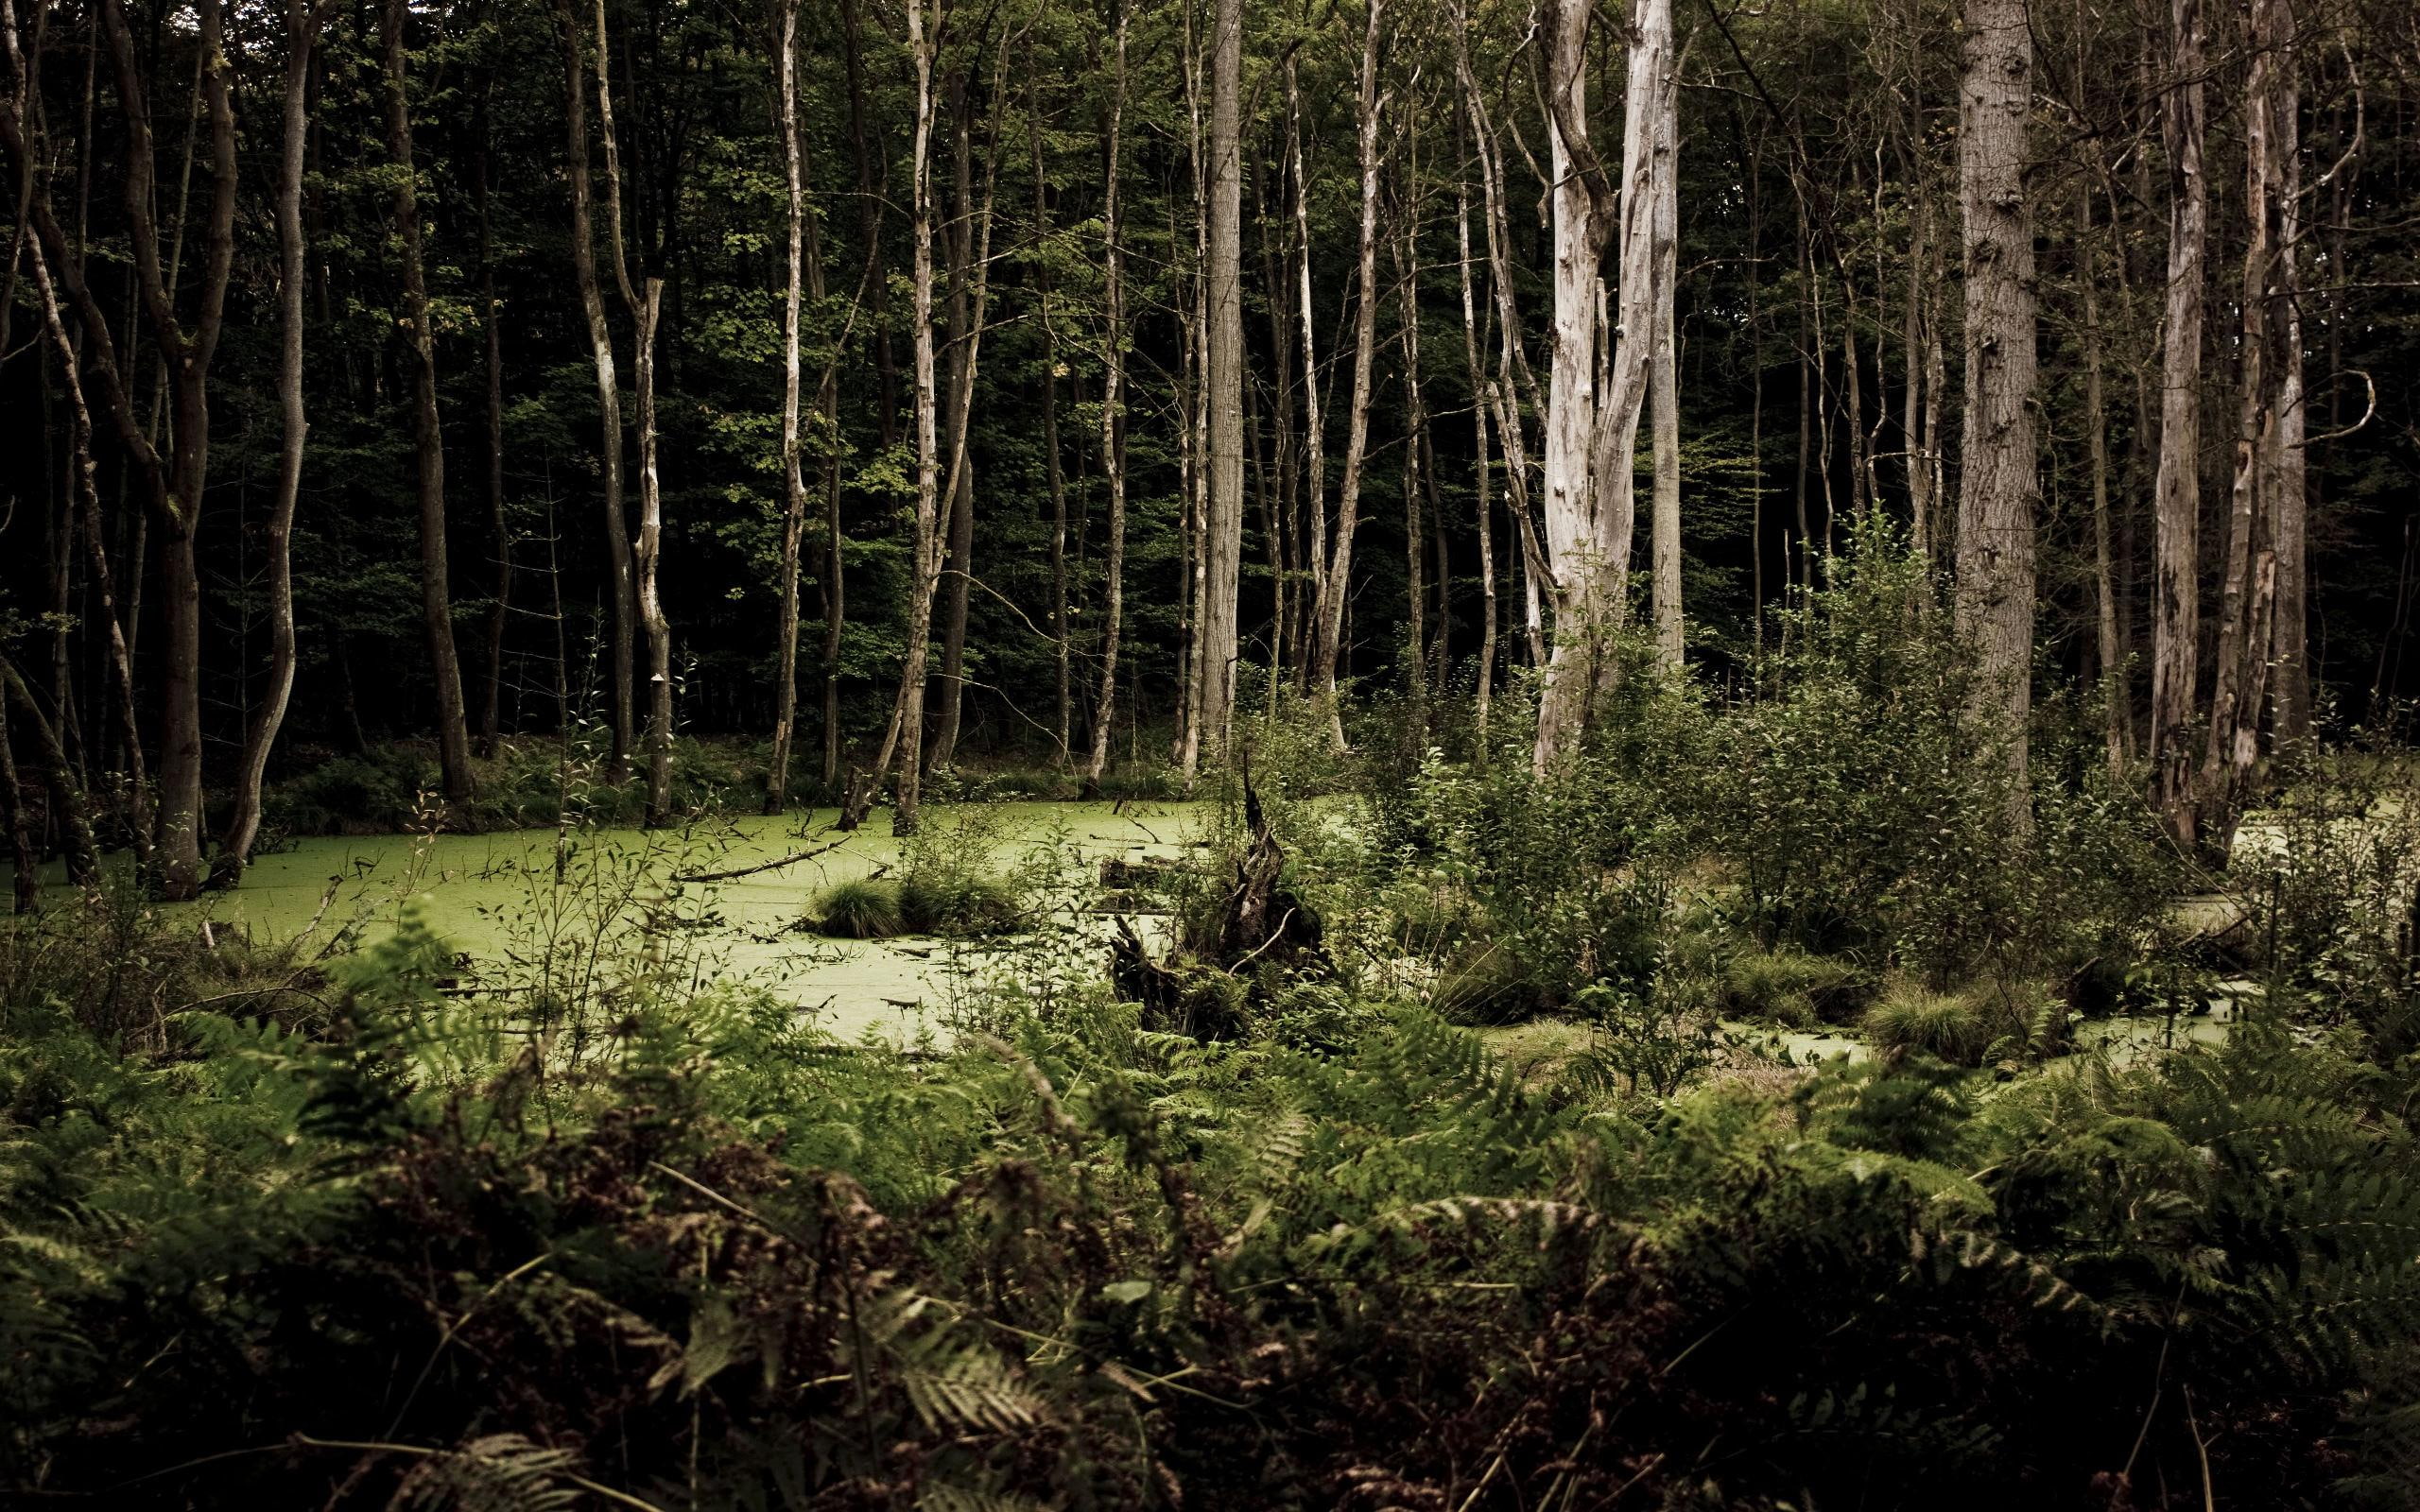 Dark Dreary Woods, trees, forests, nature and landscapes